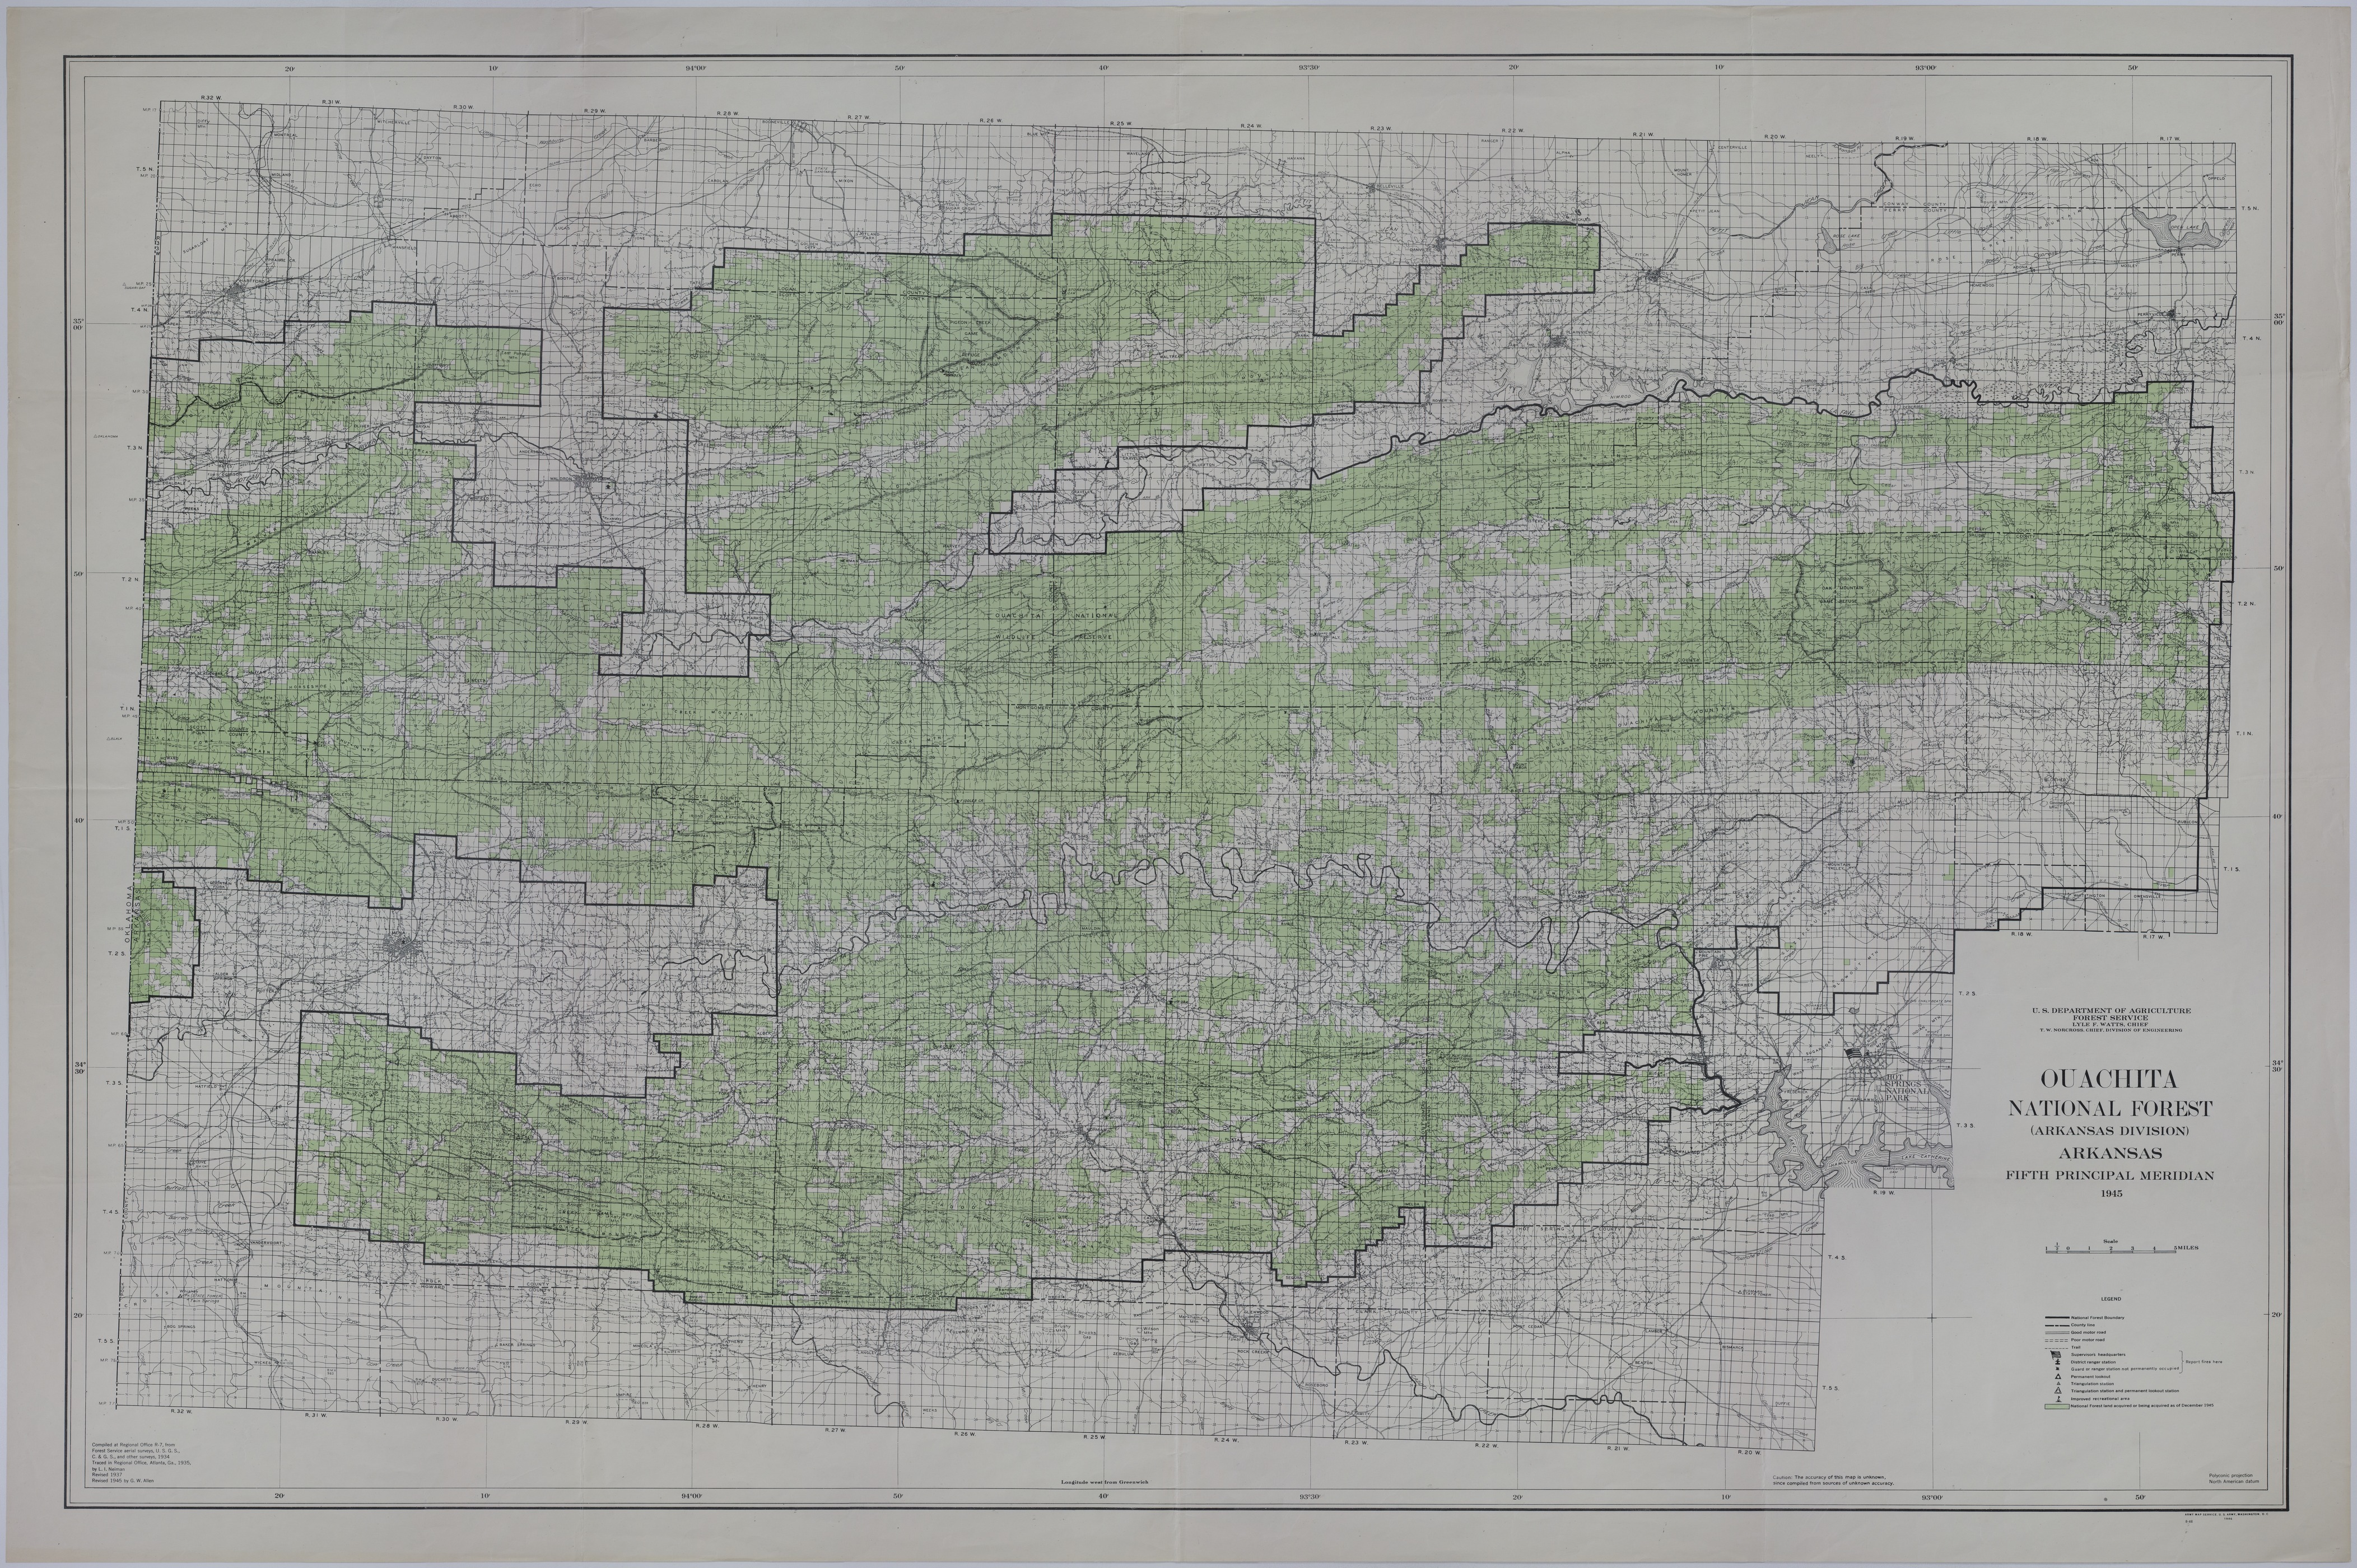 Ouachita National Forest Trail Map Map Of Ouachita National Forest | Harry S. Truman